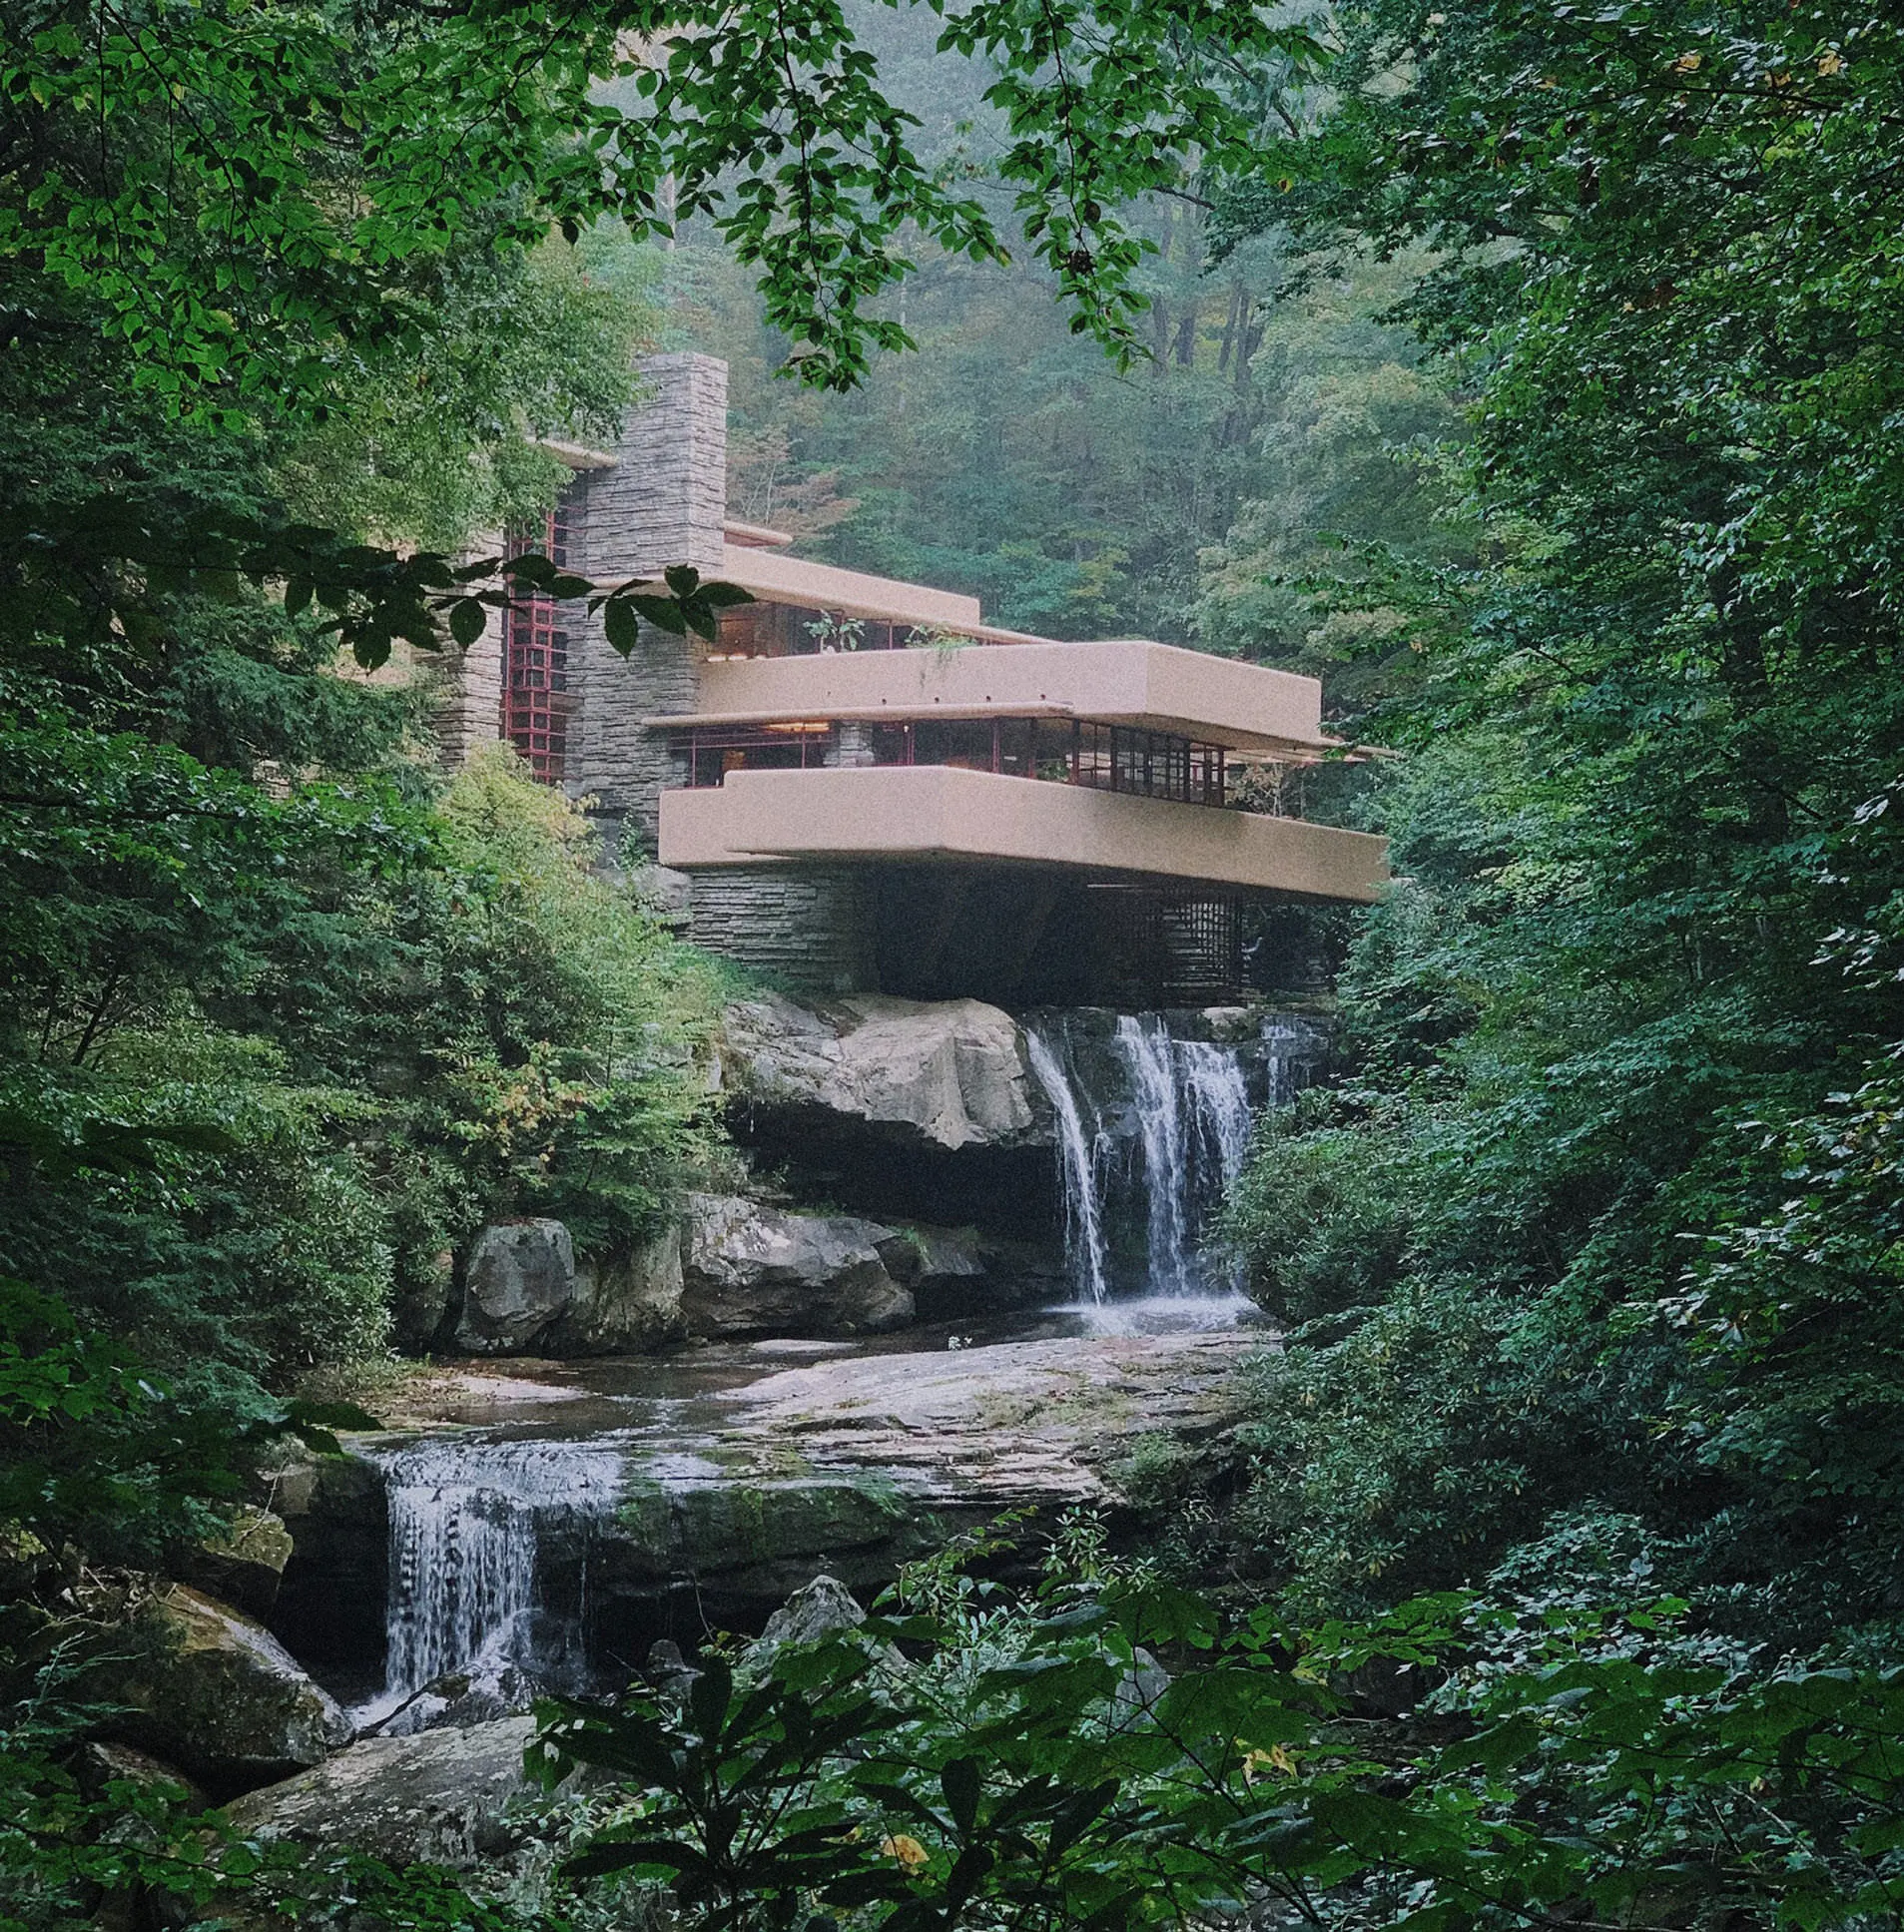 The house known as Fallingwater surrounded by trees